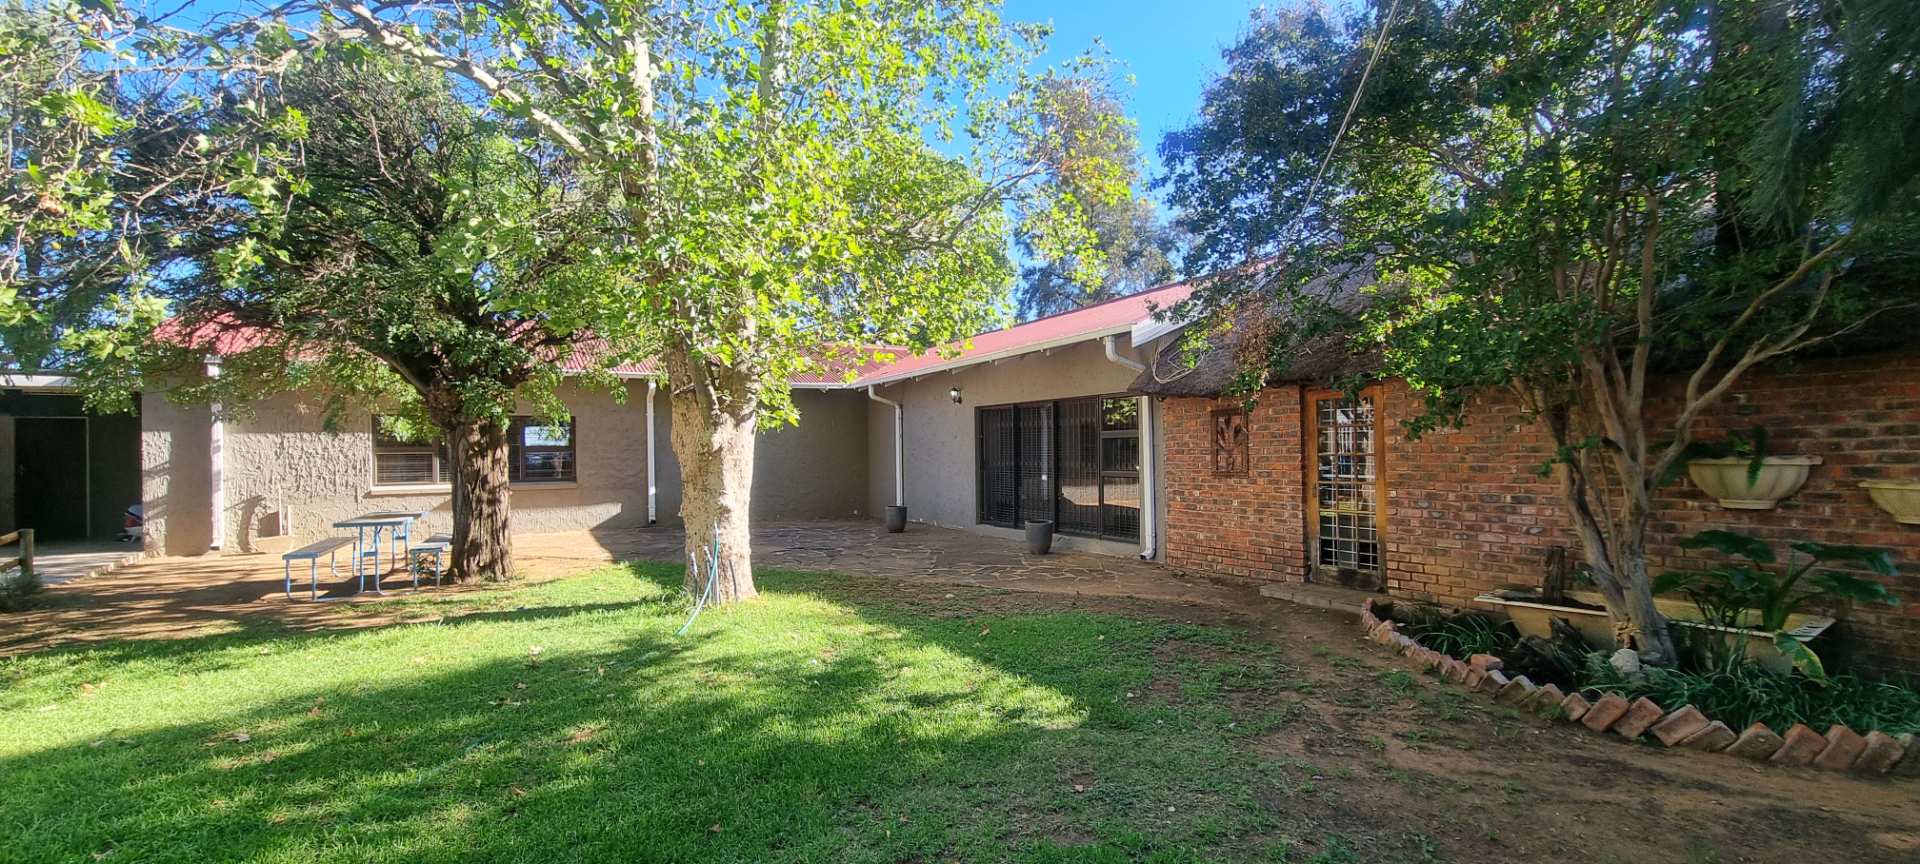 4 Bedroom Property for Sale in Roodewal Free State